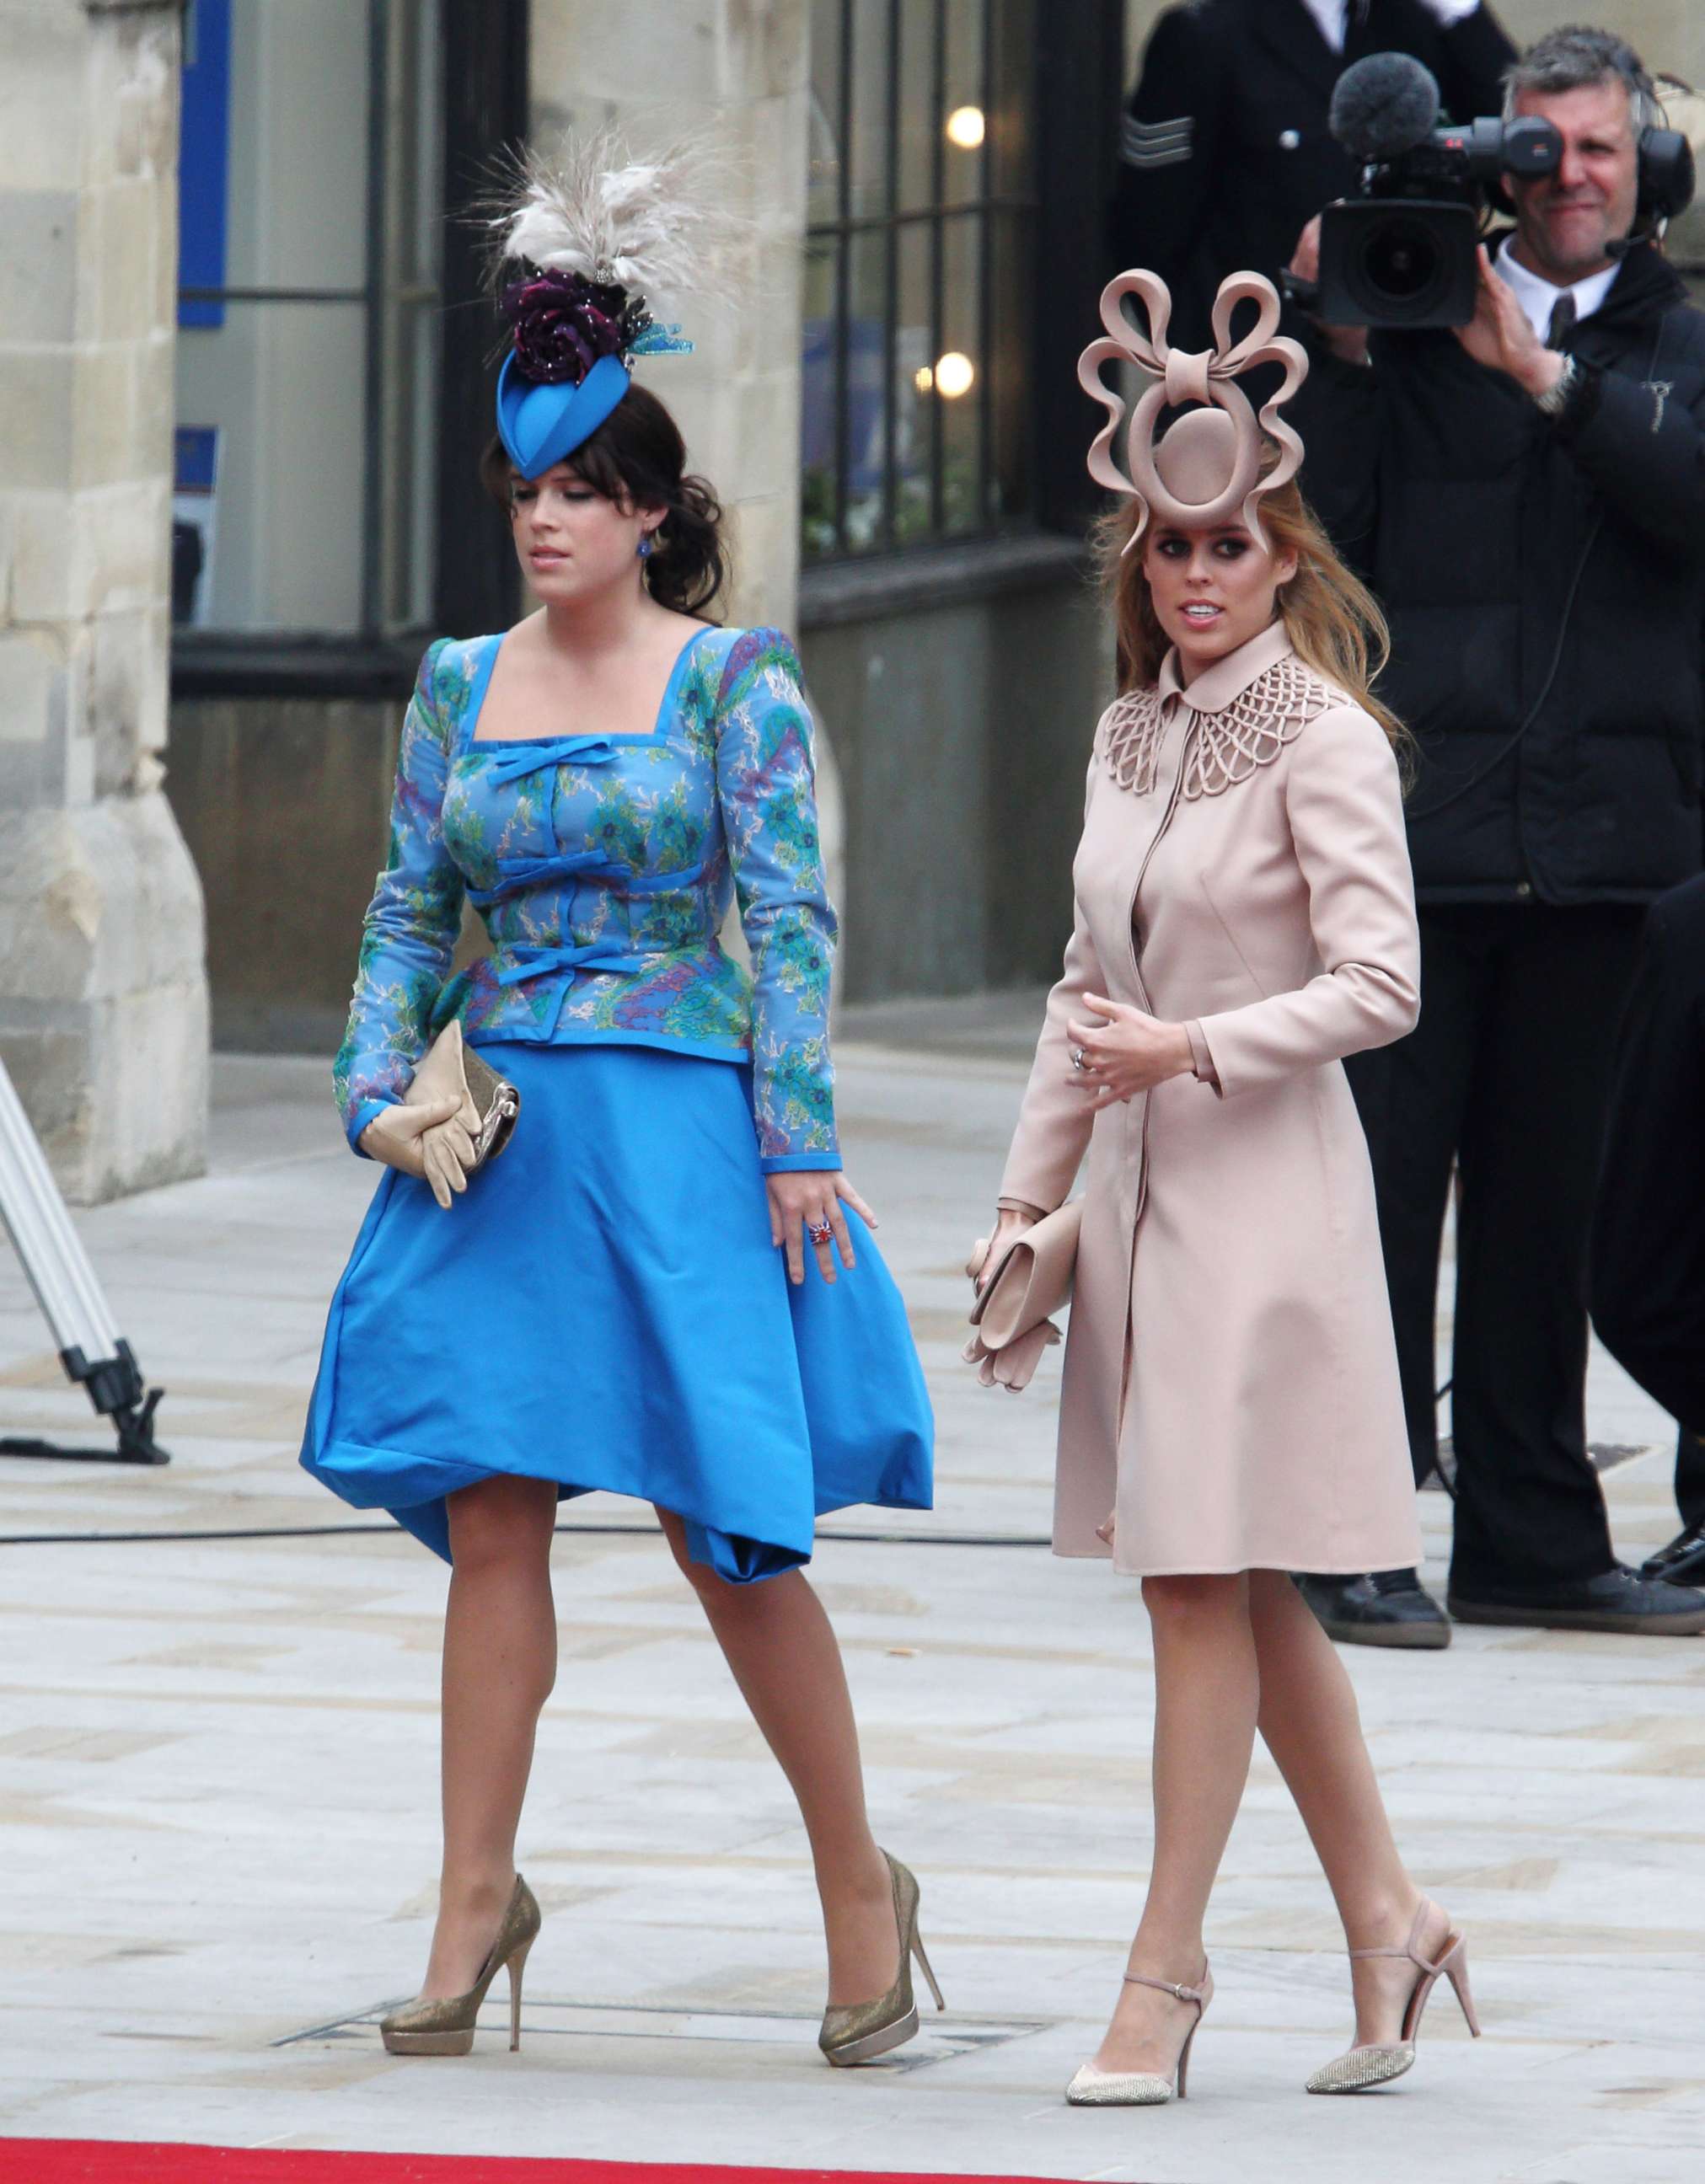 PHOTO: Princess Beatrice of York and Princess Eugenie of York arrive at the wedding of Prince William to Catherine Middleton at Westminster Abbey on April 29, 2011 in London.